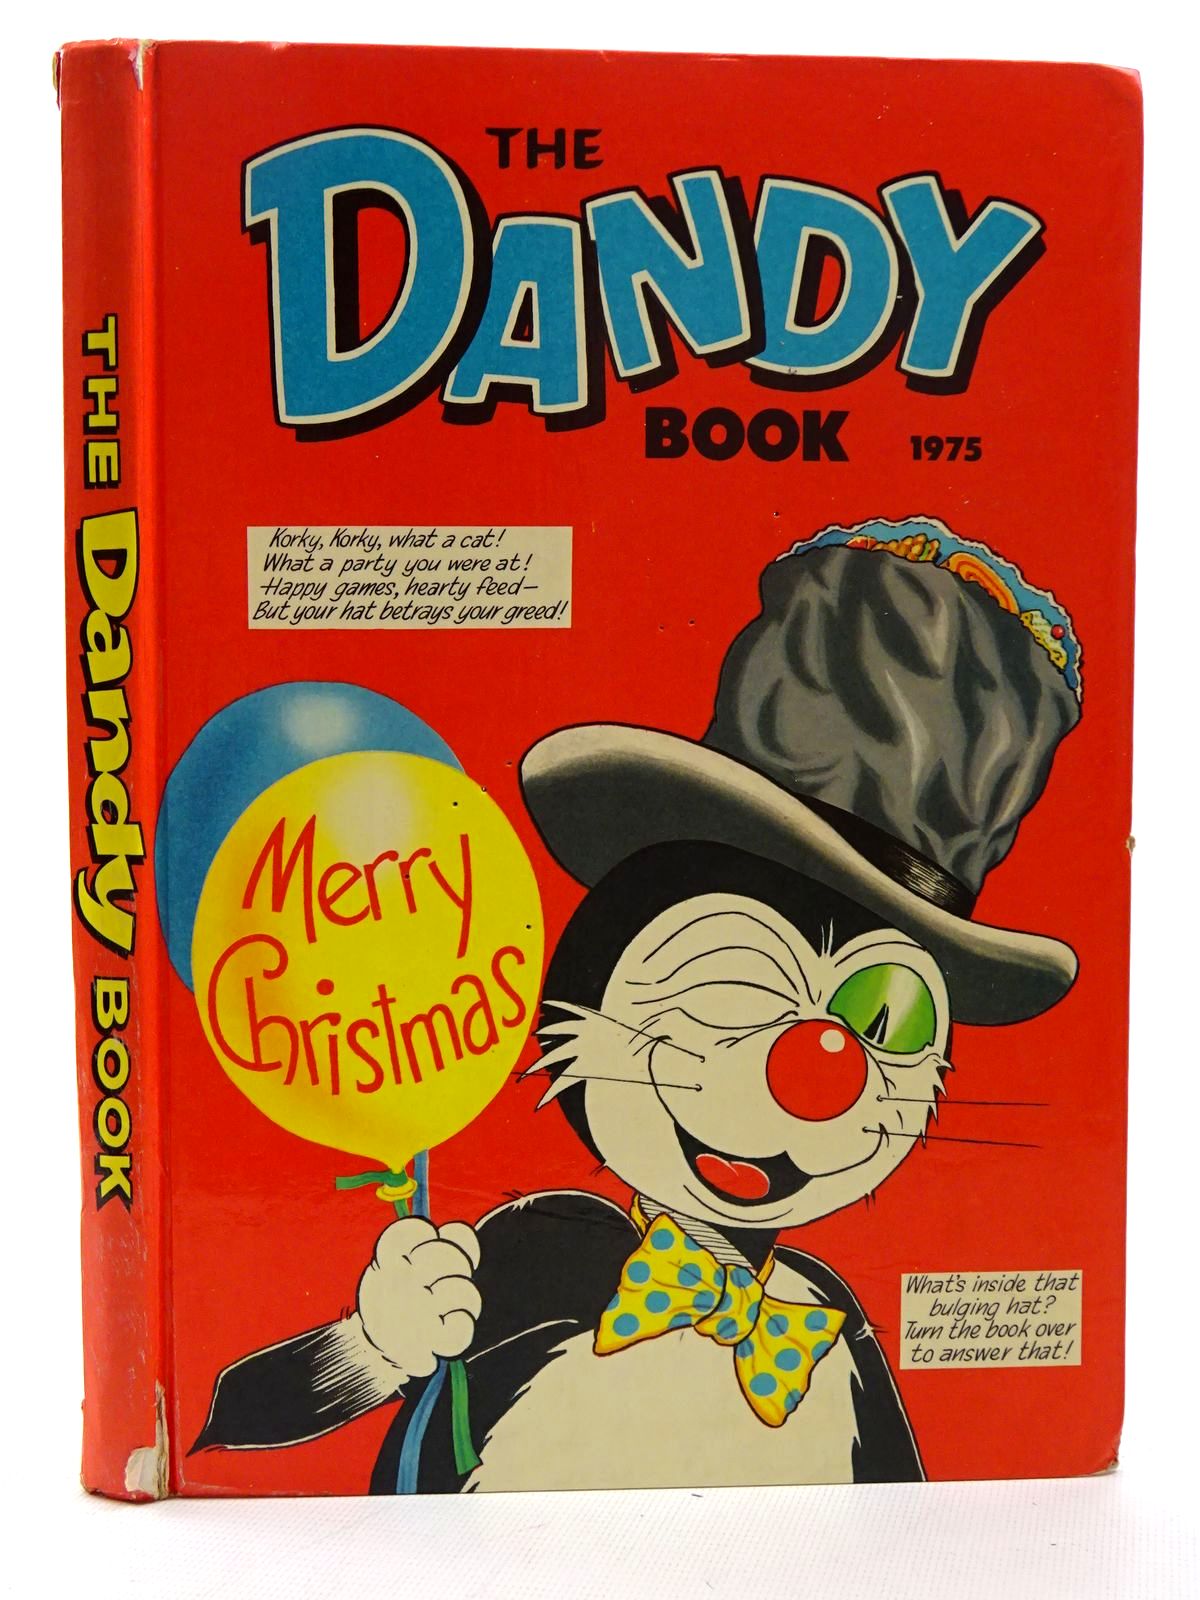 Photo of THE DANDY BOOK 1975 published by D.C. Thomson & Co Ltd. (STOCK CODE: 1610507)  for sale by Stella & Rose's Books